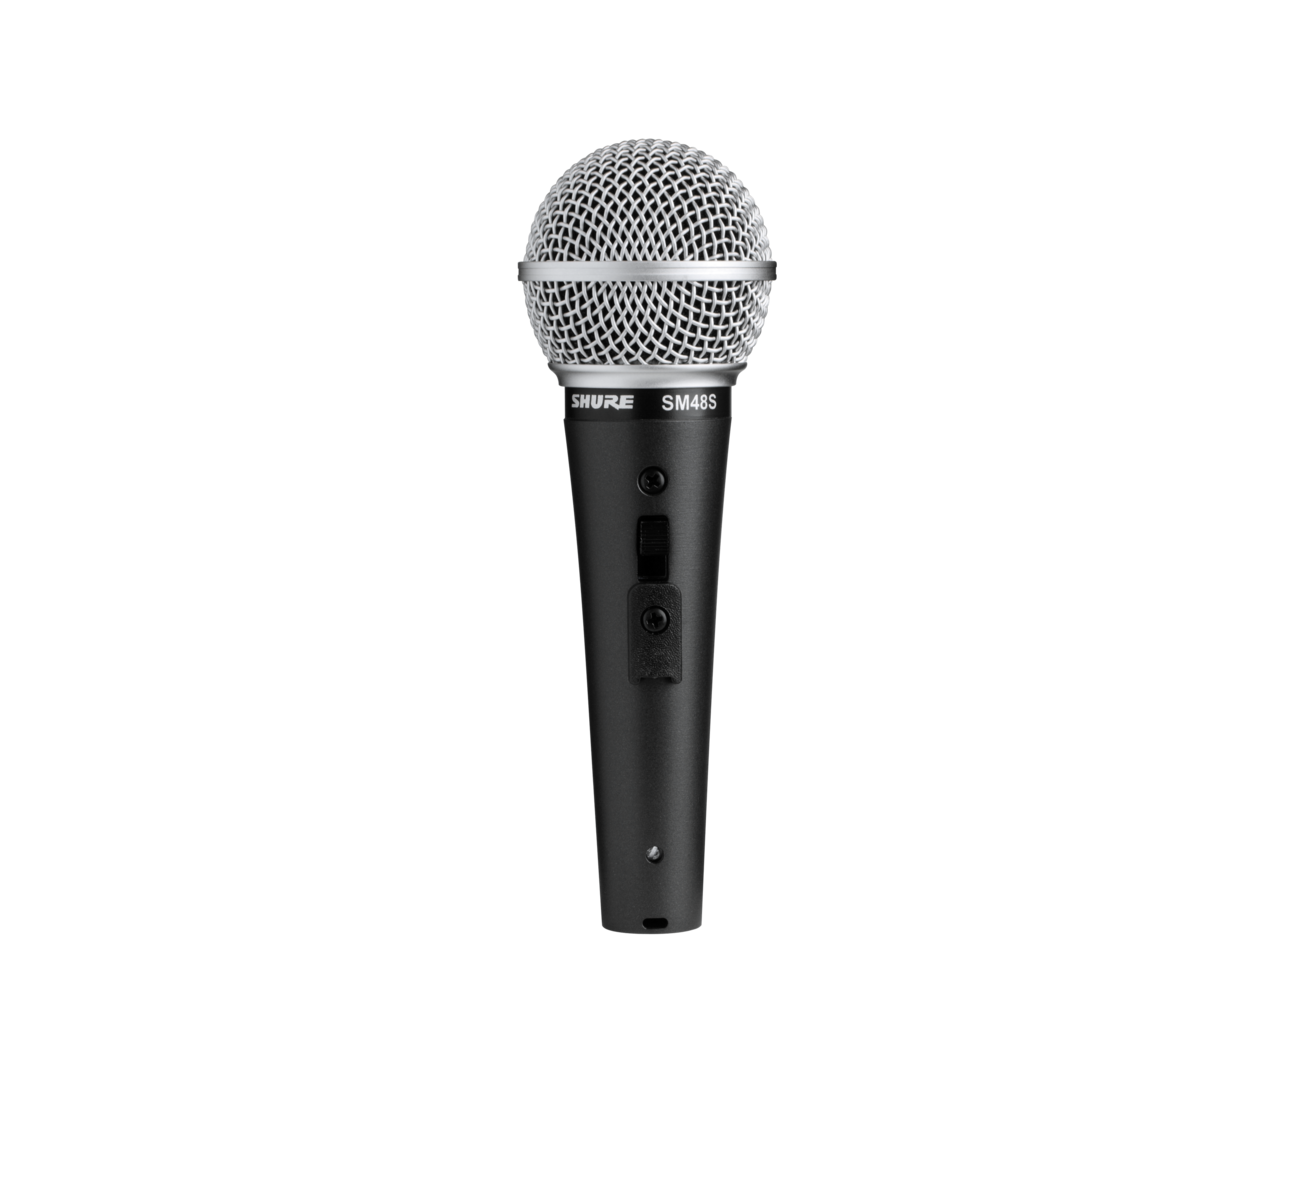 SHURE SM48 Cardioid Dynamic Vocal Microphone